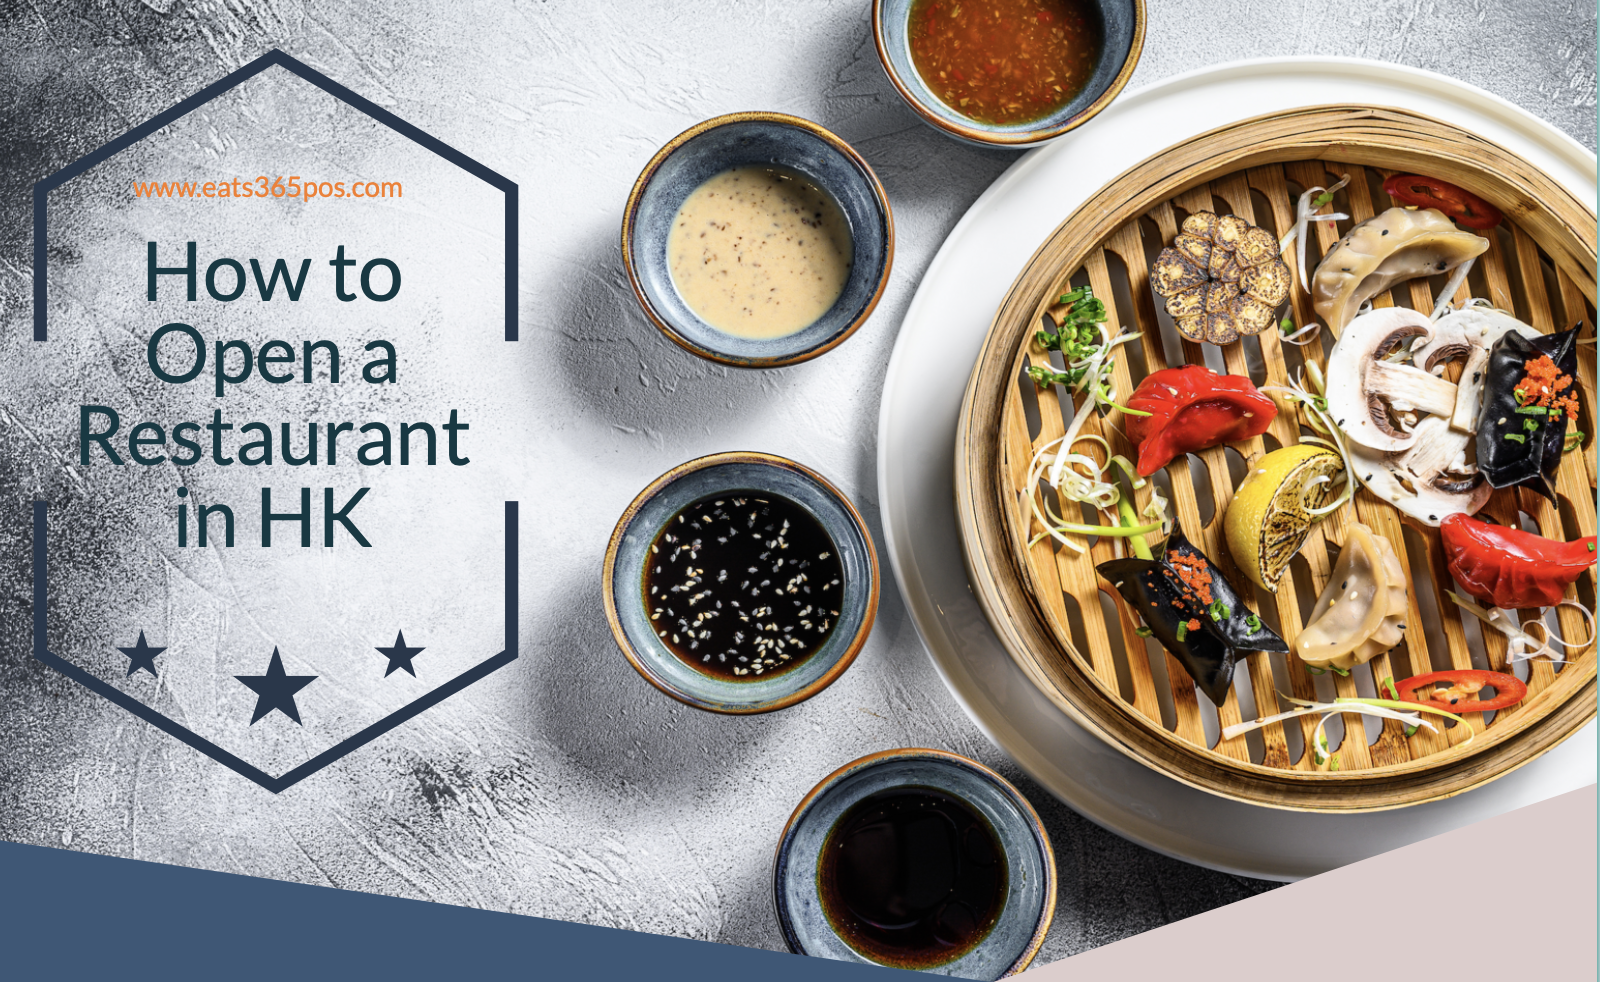 How to Open a Restaurant Business in Hong Kong - 5-Step Guide (2021)